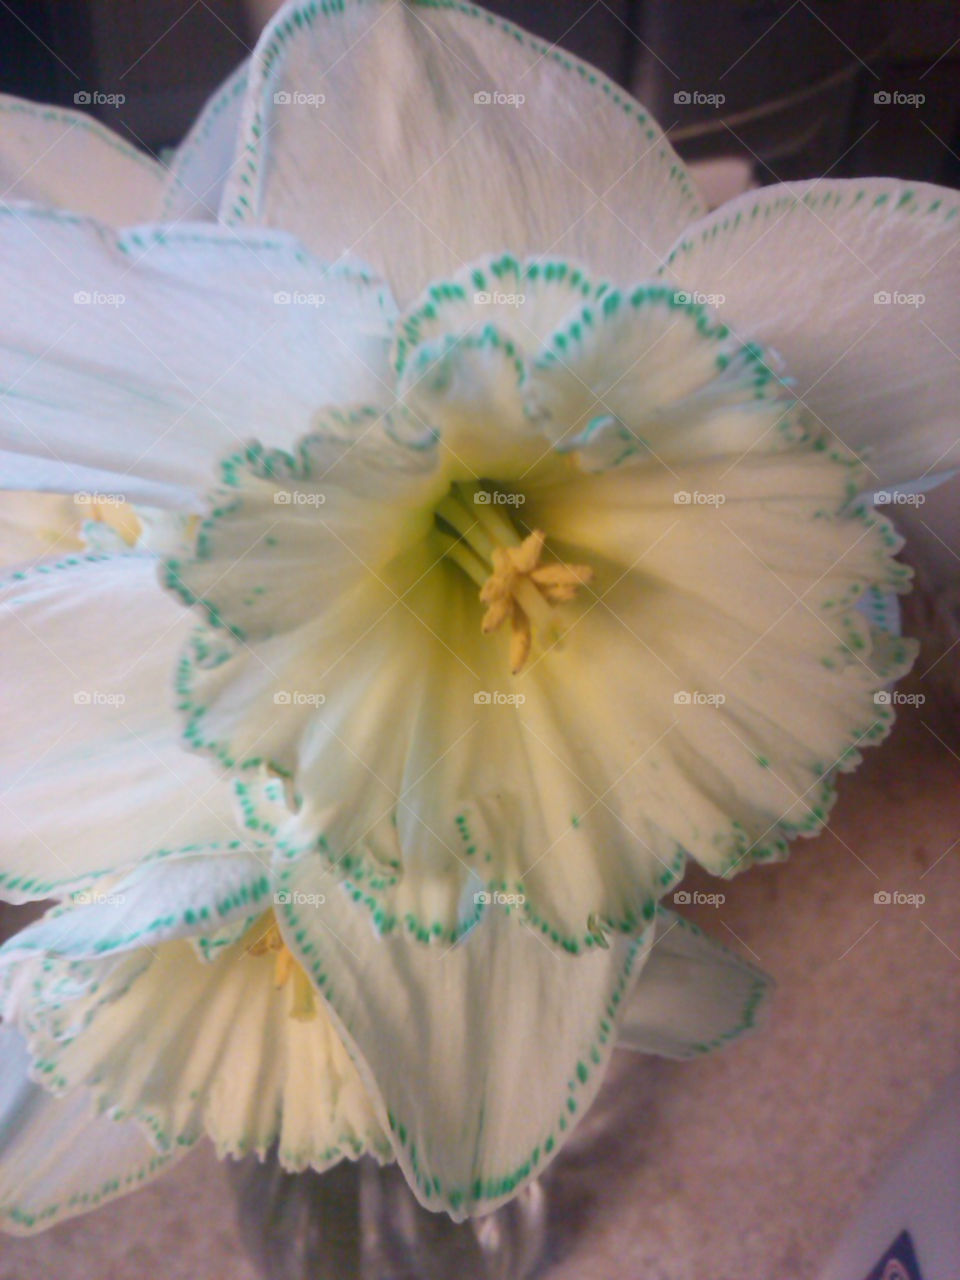 daffodil infused with dye